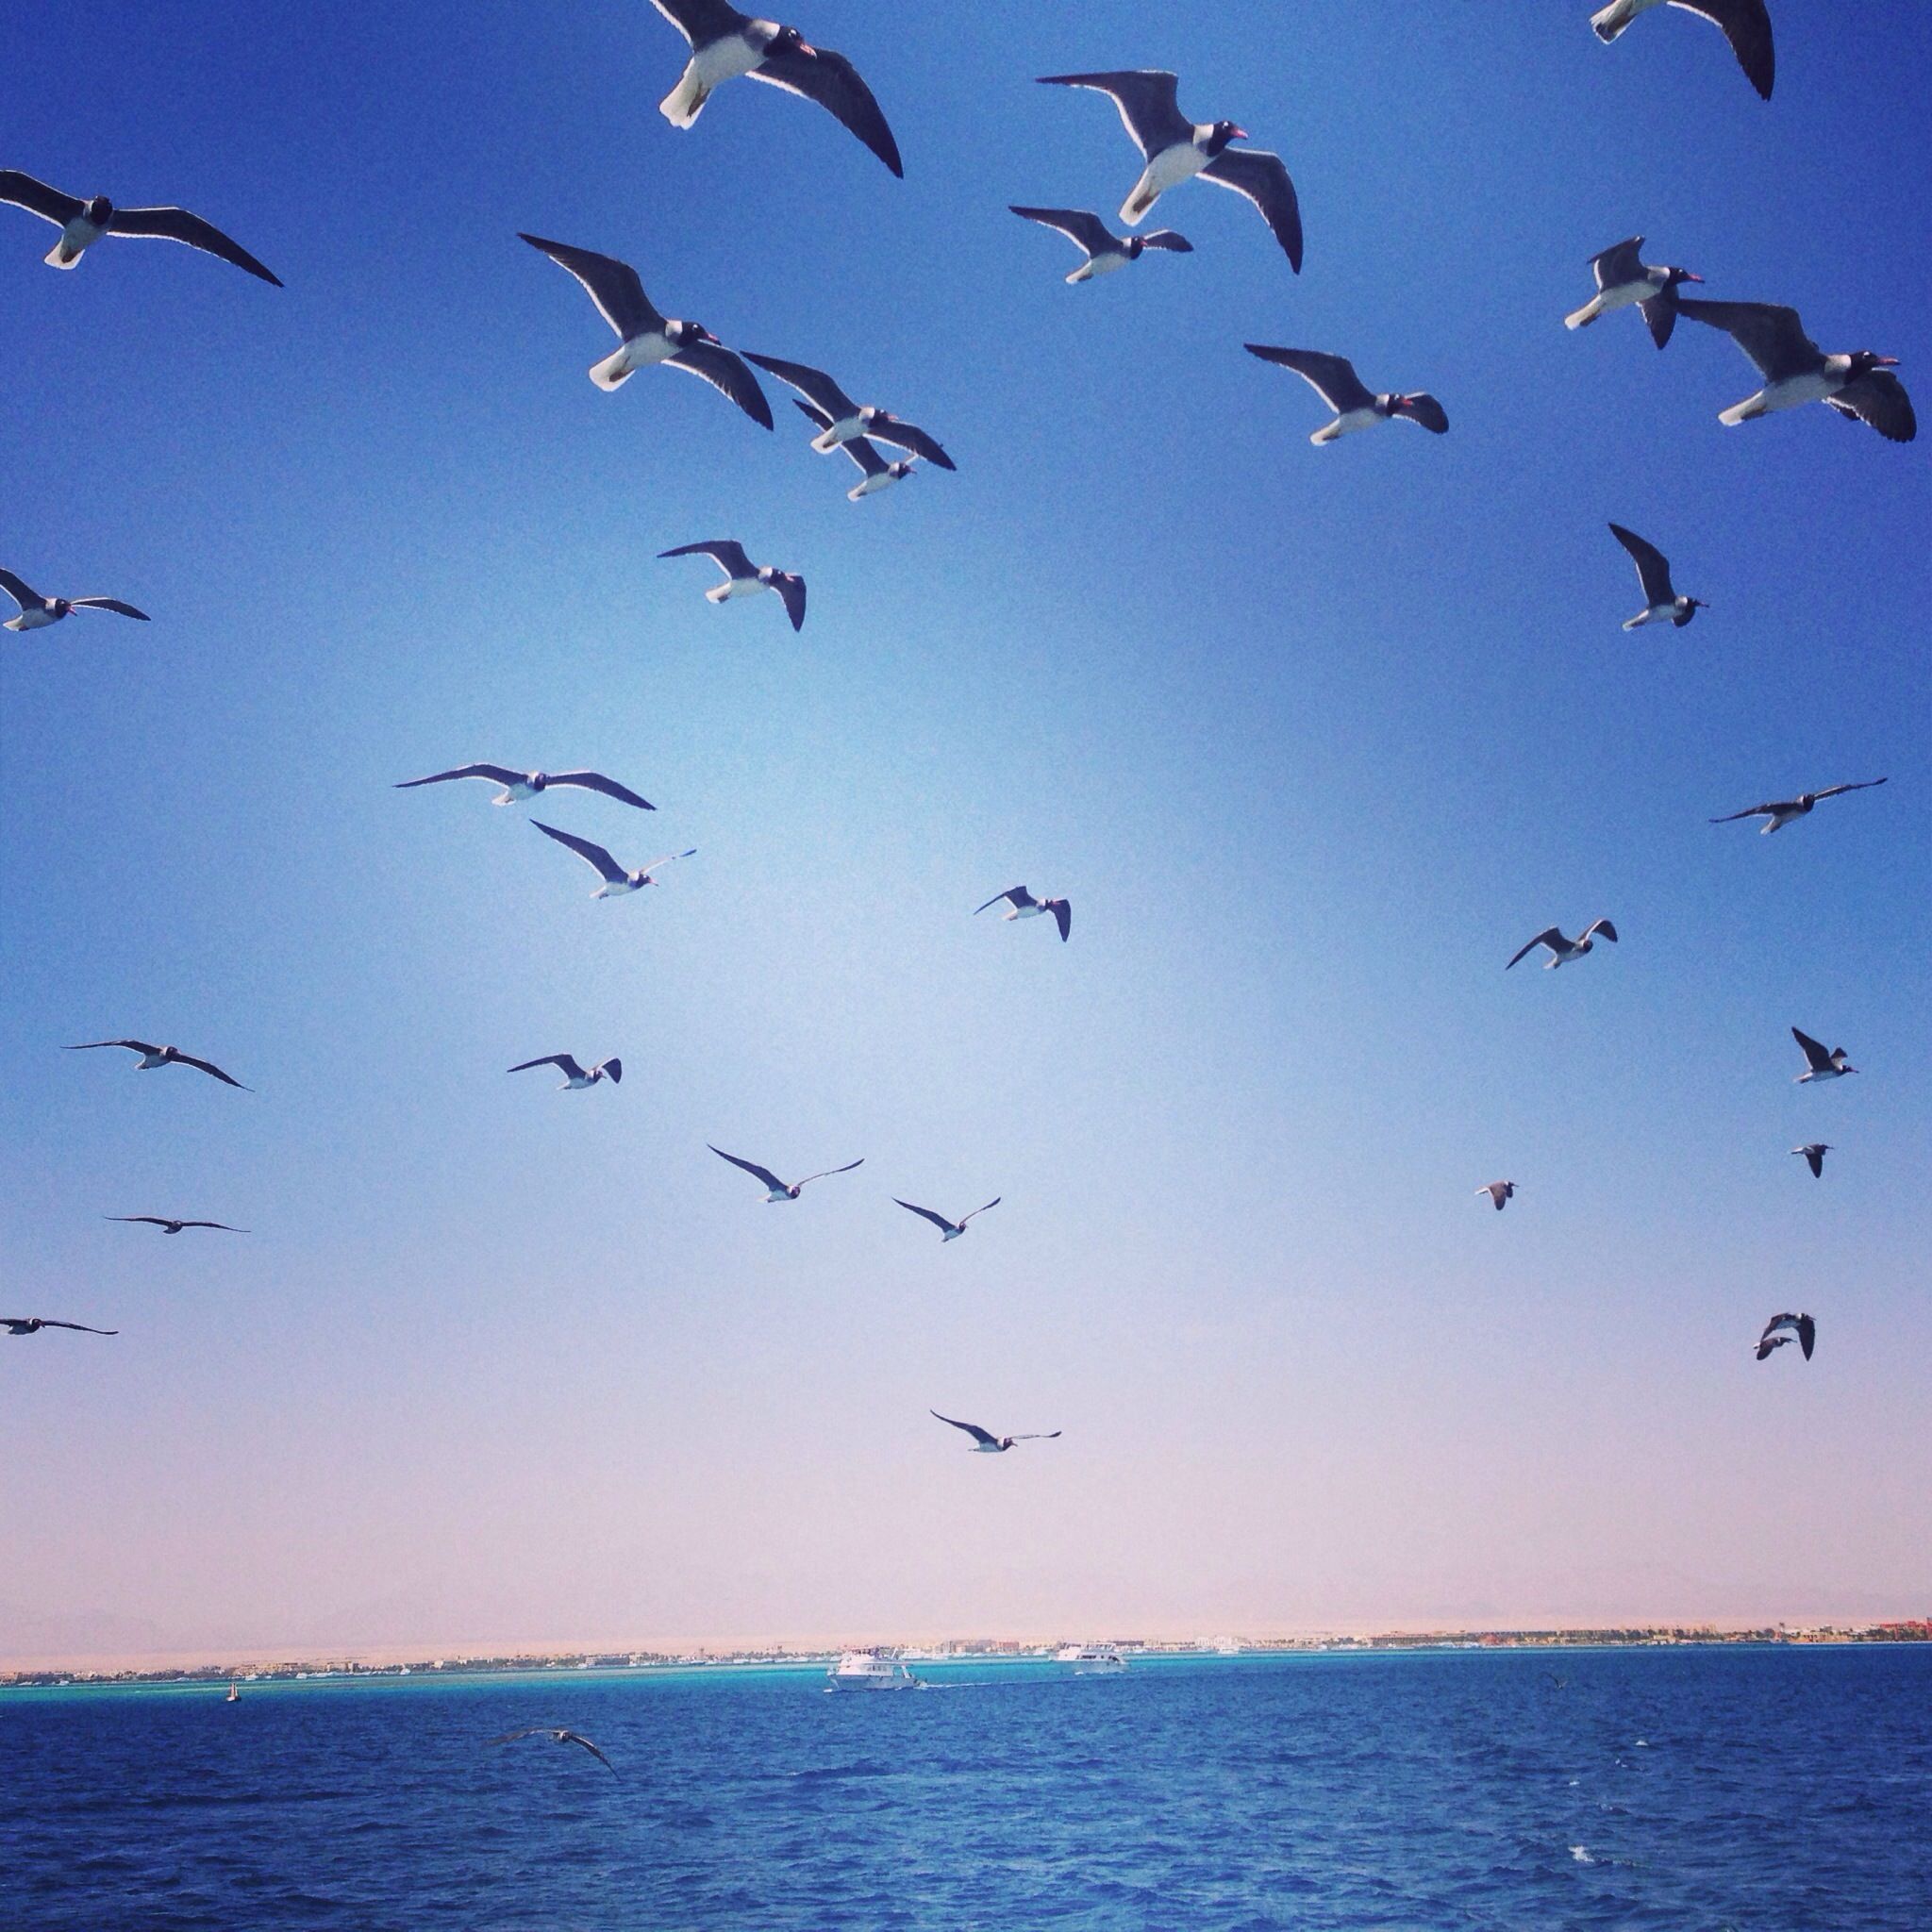 bird, flying, animal themes, sea, animals in the wild, water, wildlife, flock of birds, horizon over water, clear sky, blue, waterfront, scenics, nature, tranquil scene, beauty in nature, tranquility, sky, seagull